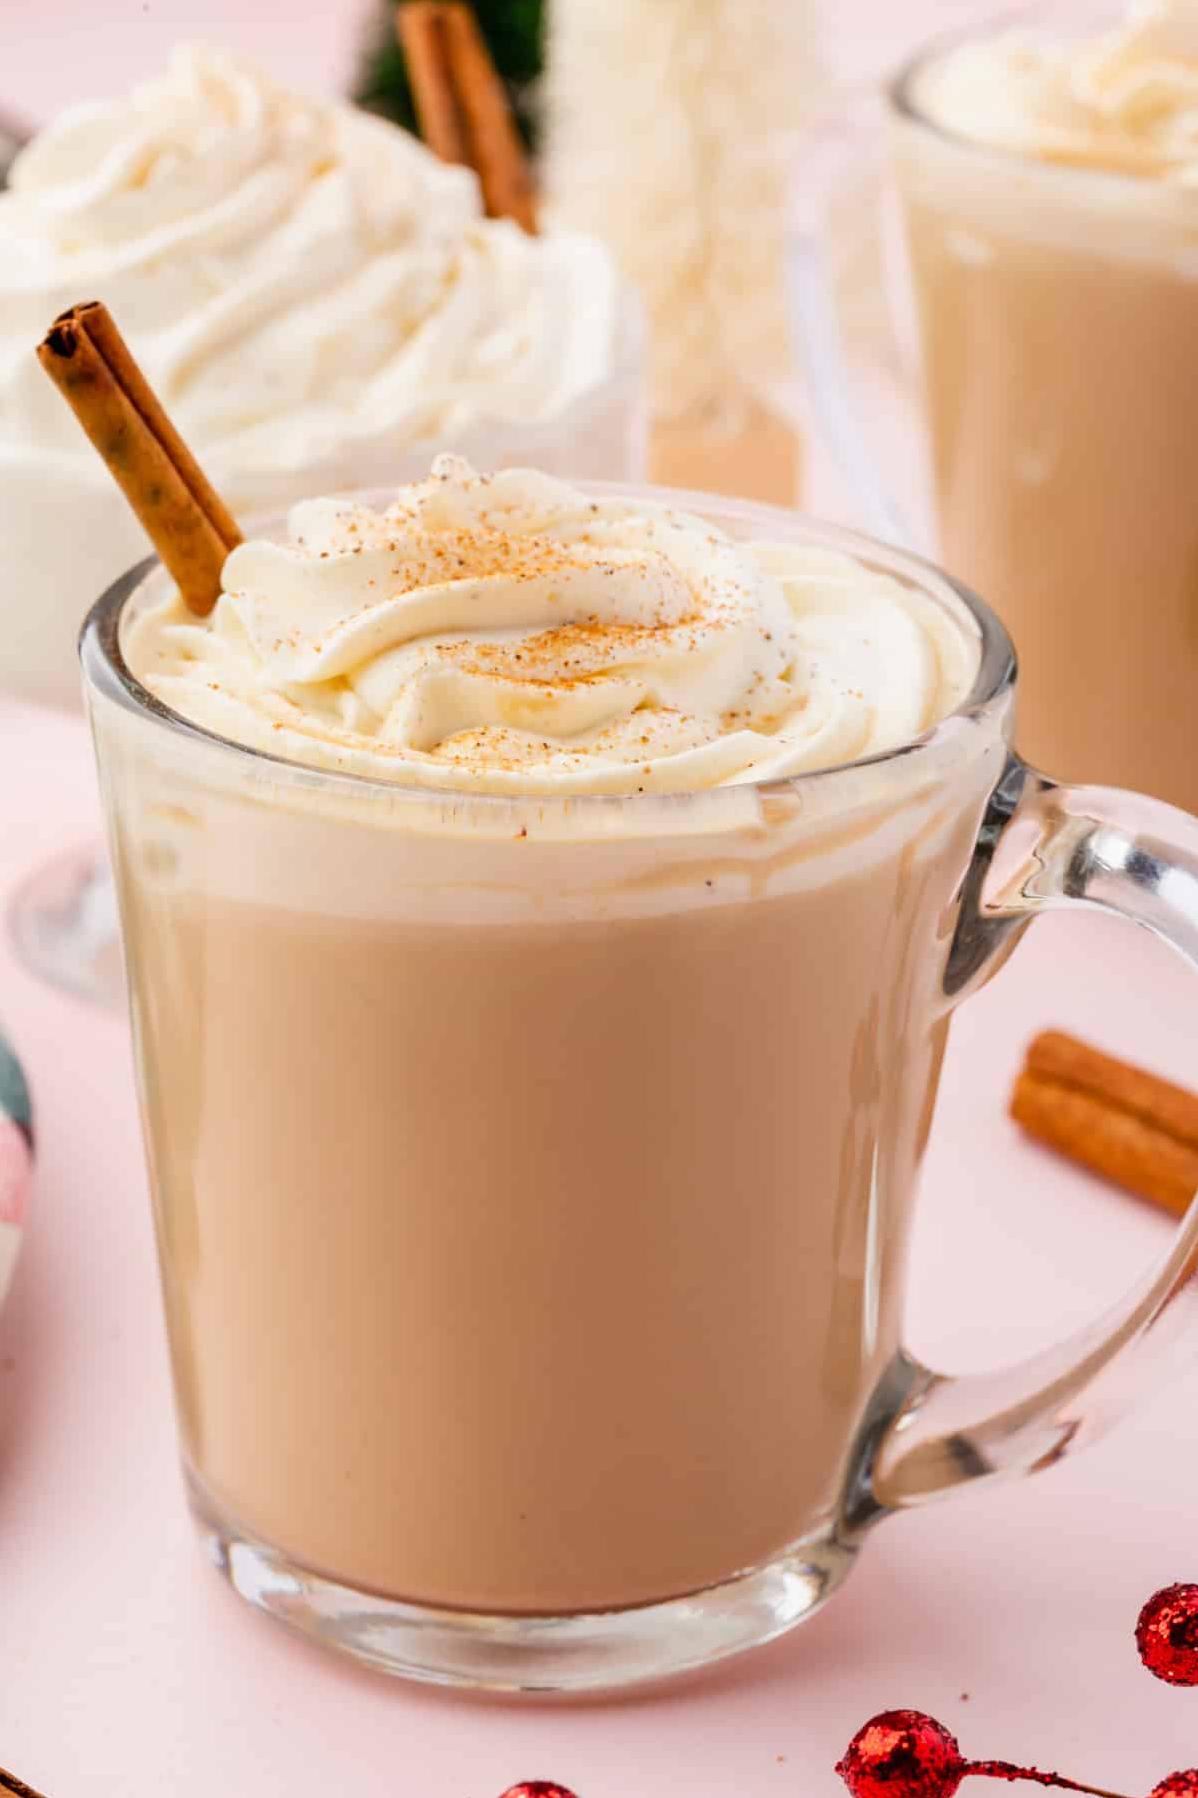  Creamy and frothy, this eggnog coffee will hit the spot